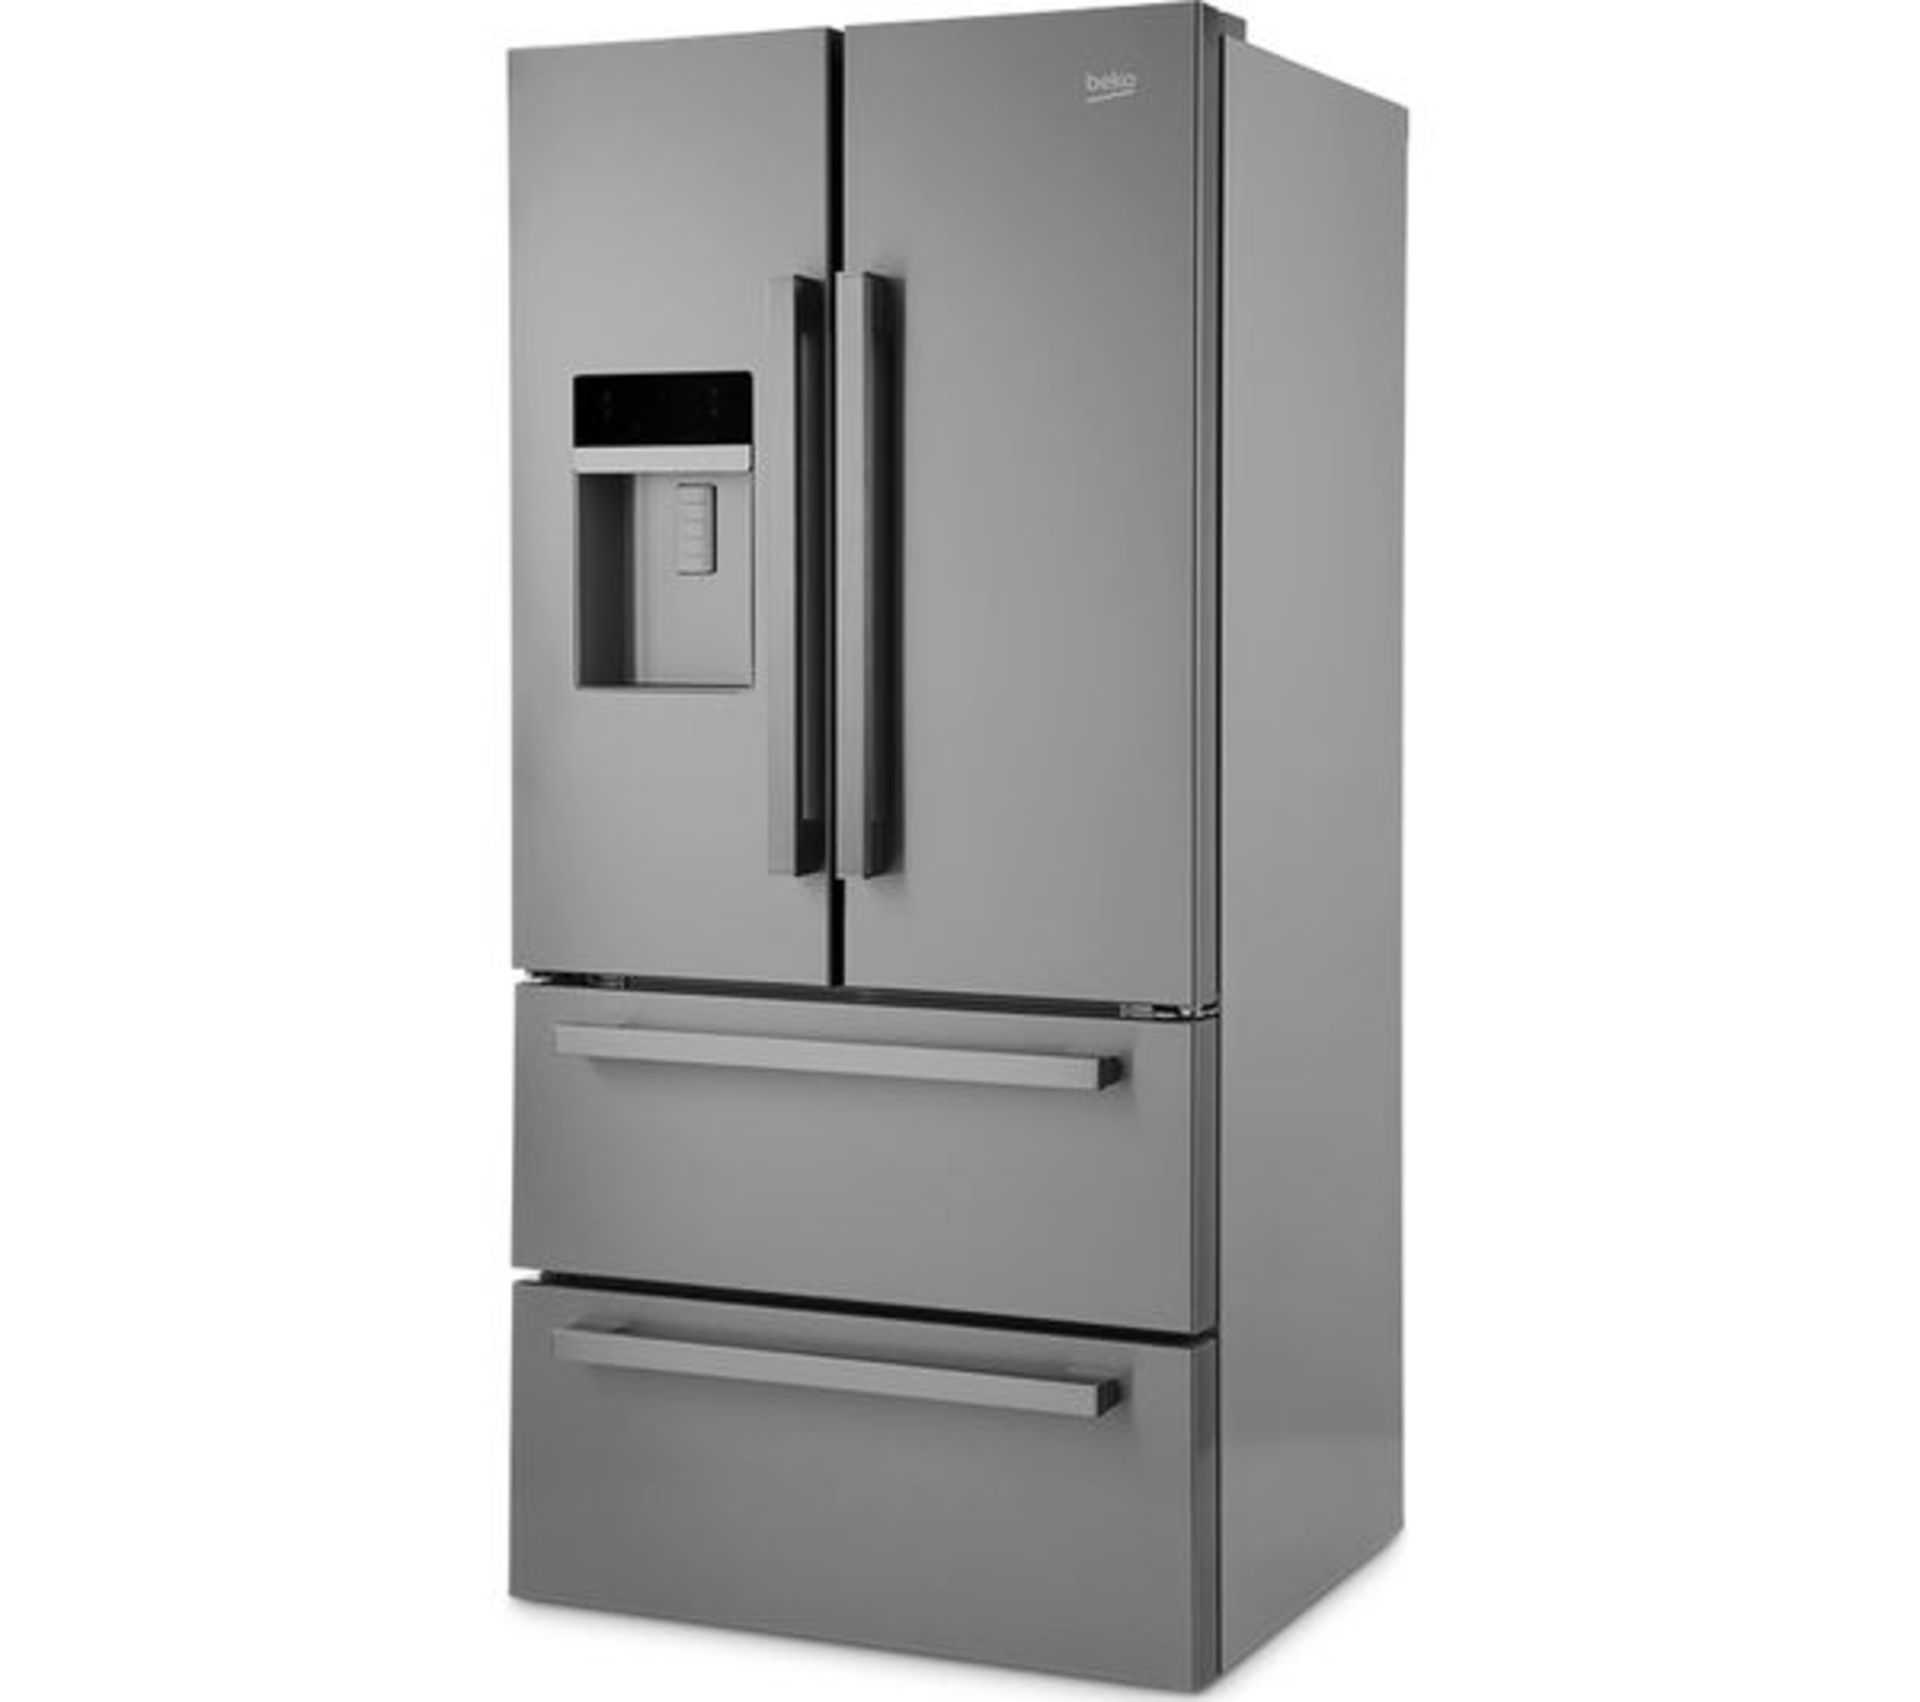 1 x Grundig GNE60520DX Stainless Steel Fridge Freezer - Features Water and Ice Dispenser - Unused - Image 4 of 4